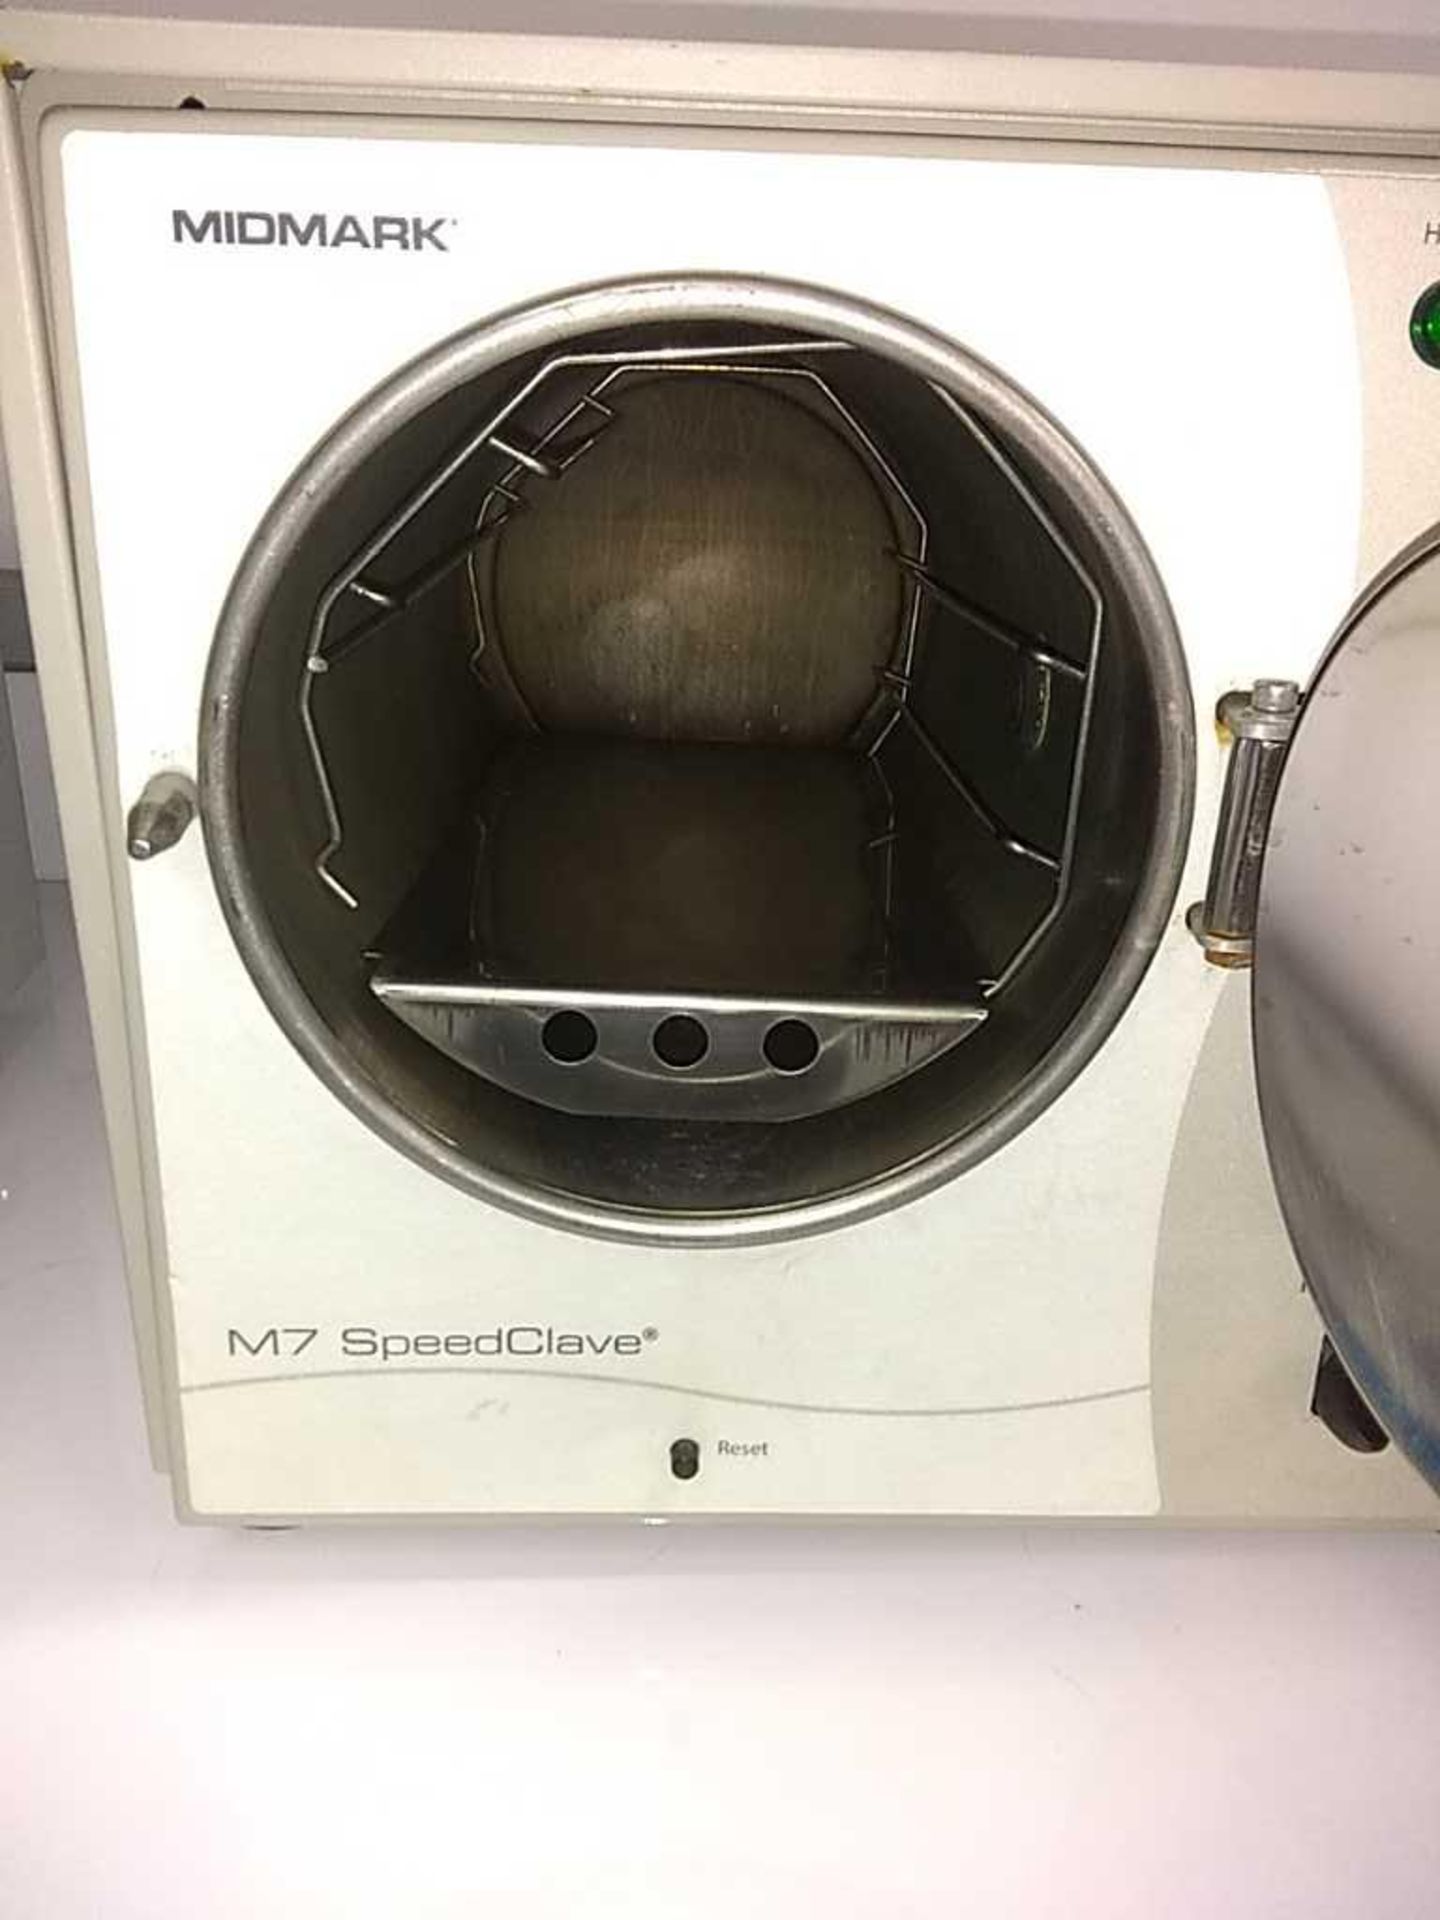 Midmark Model M7 SpeedClave Benchtop Autoclave - Image 5 of 6